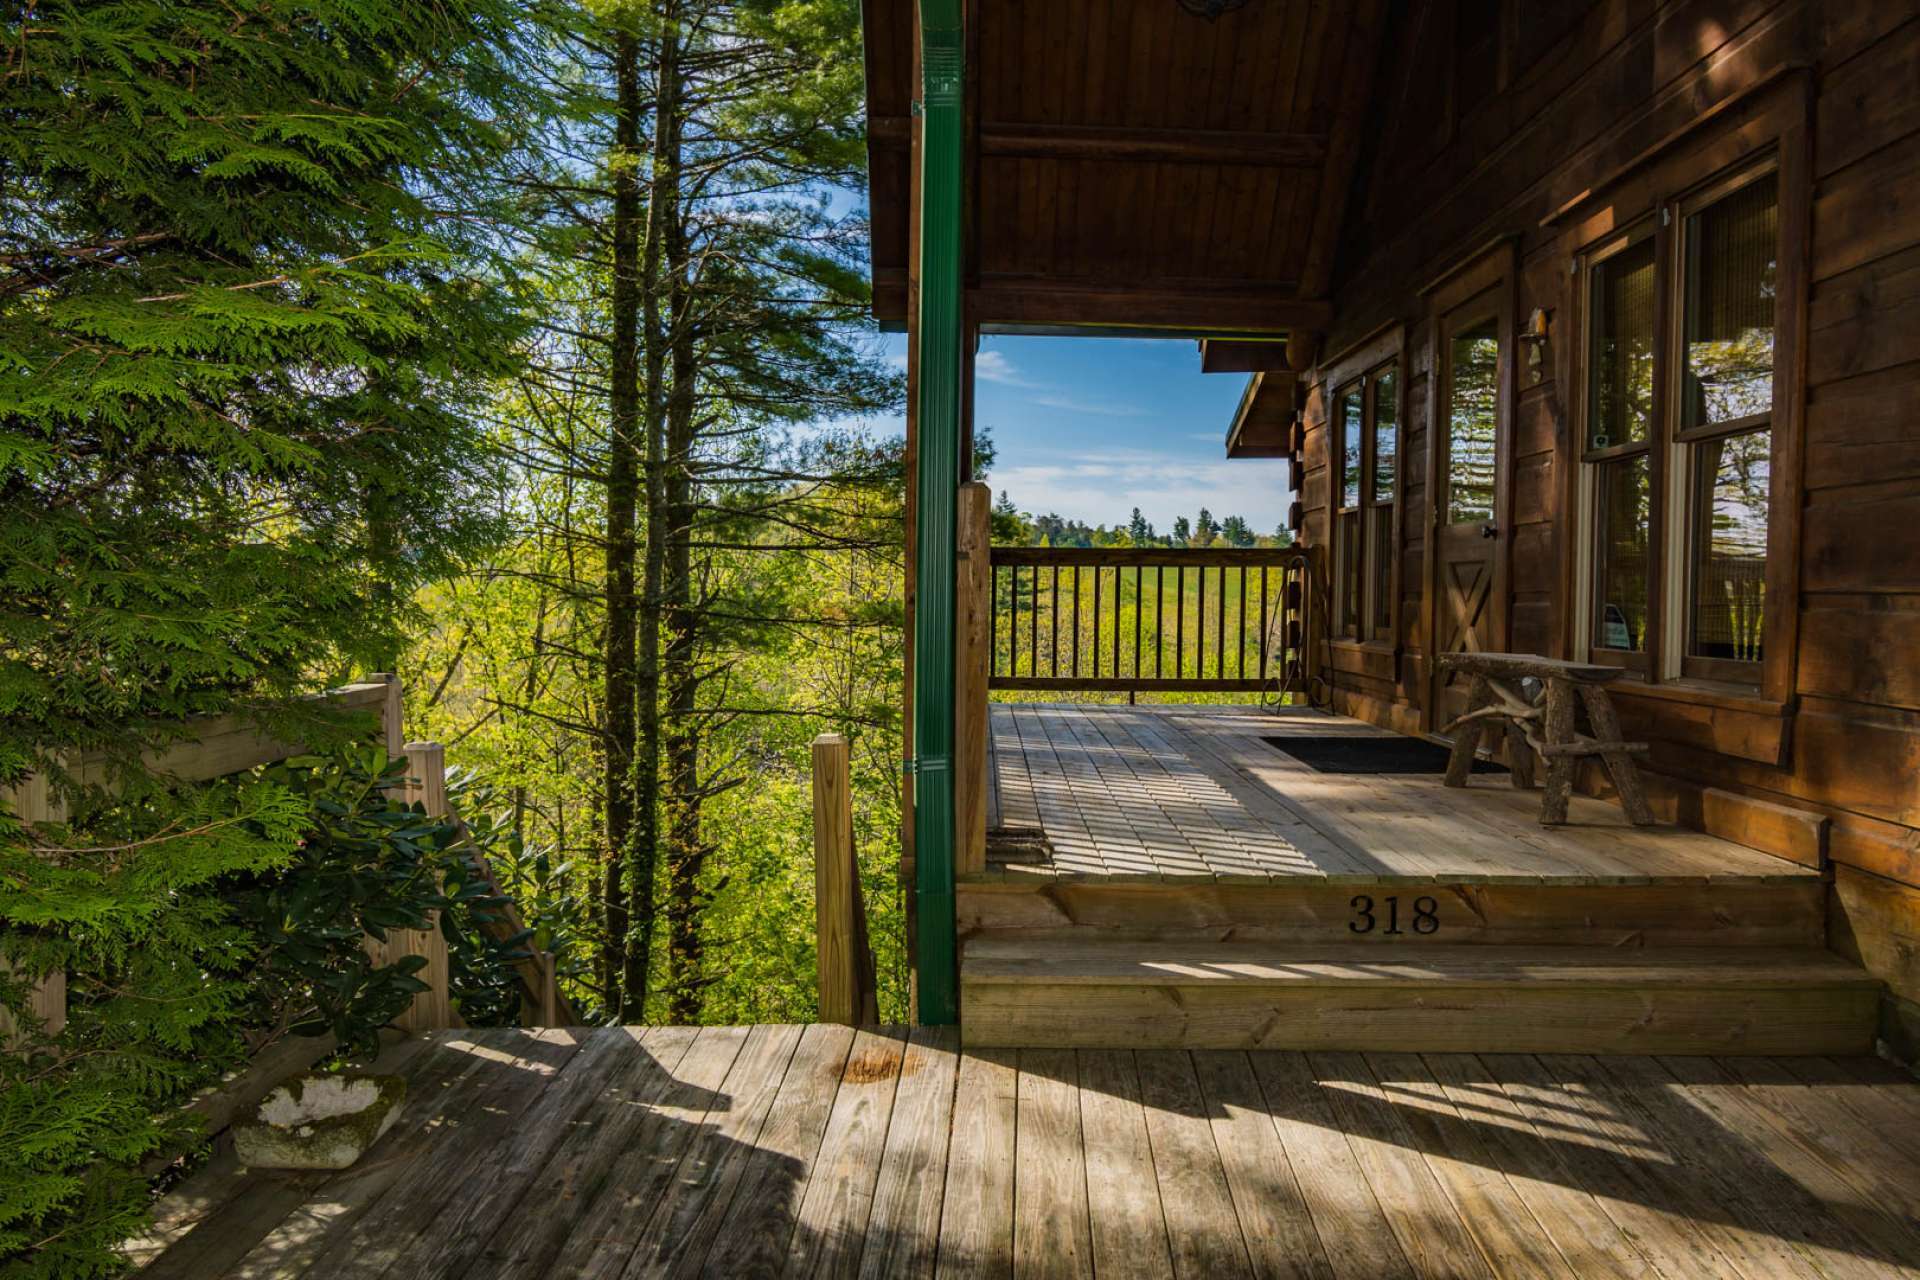 A covered front porch welcomes you and invites you to step inside for a true log cabin living experience with all of today's modern conveniences, after taking time to enjoy the views.